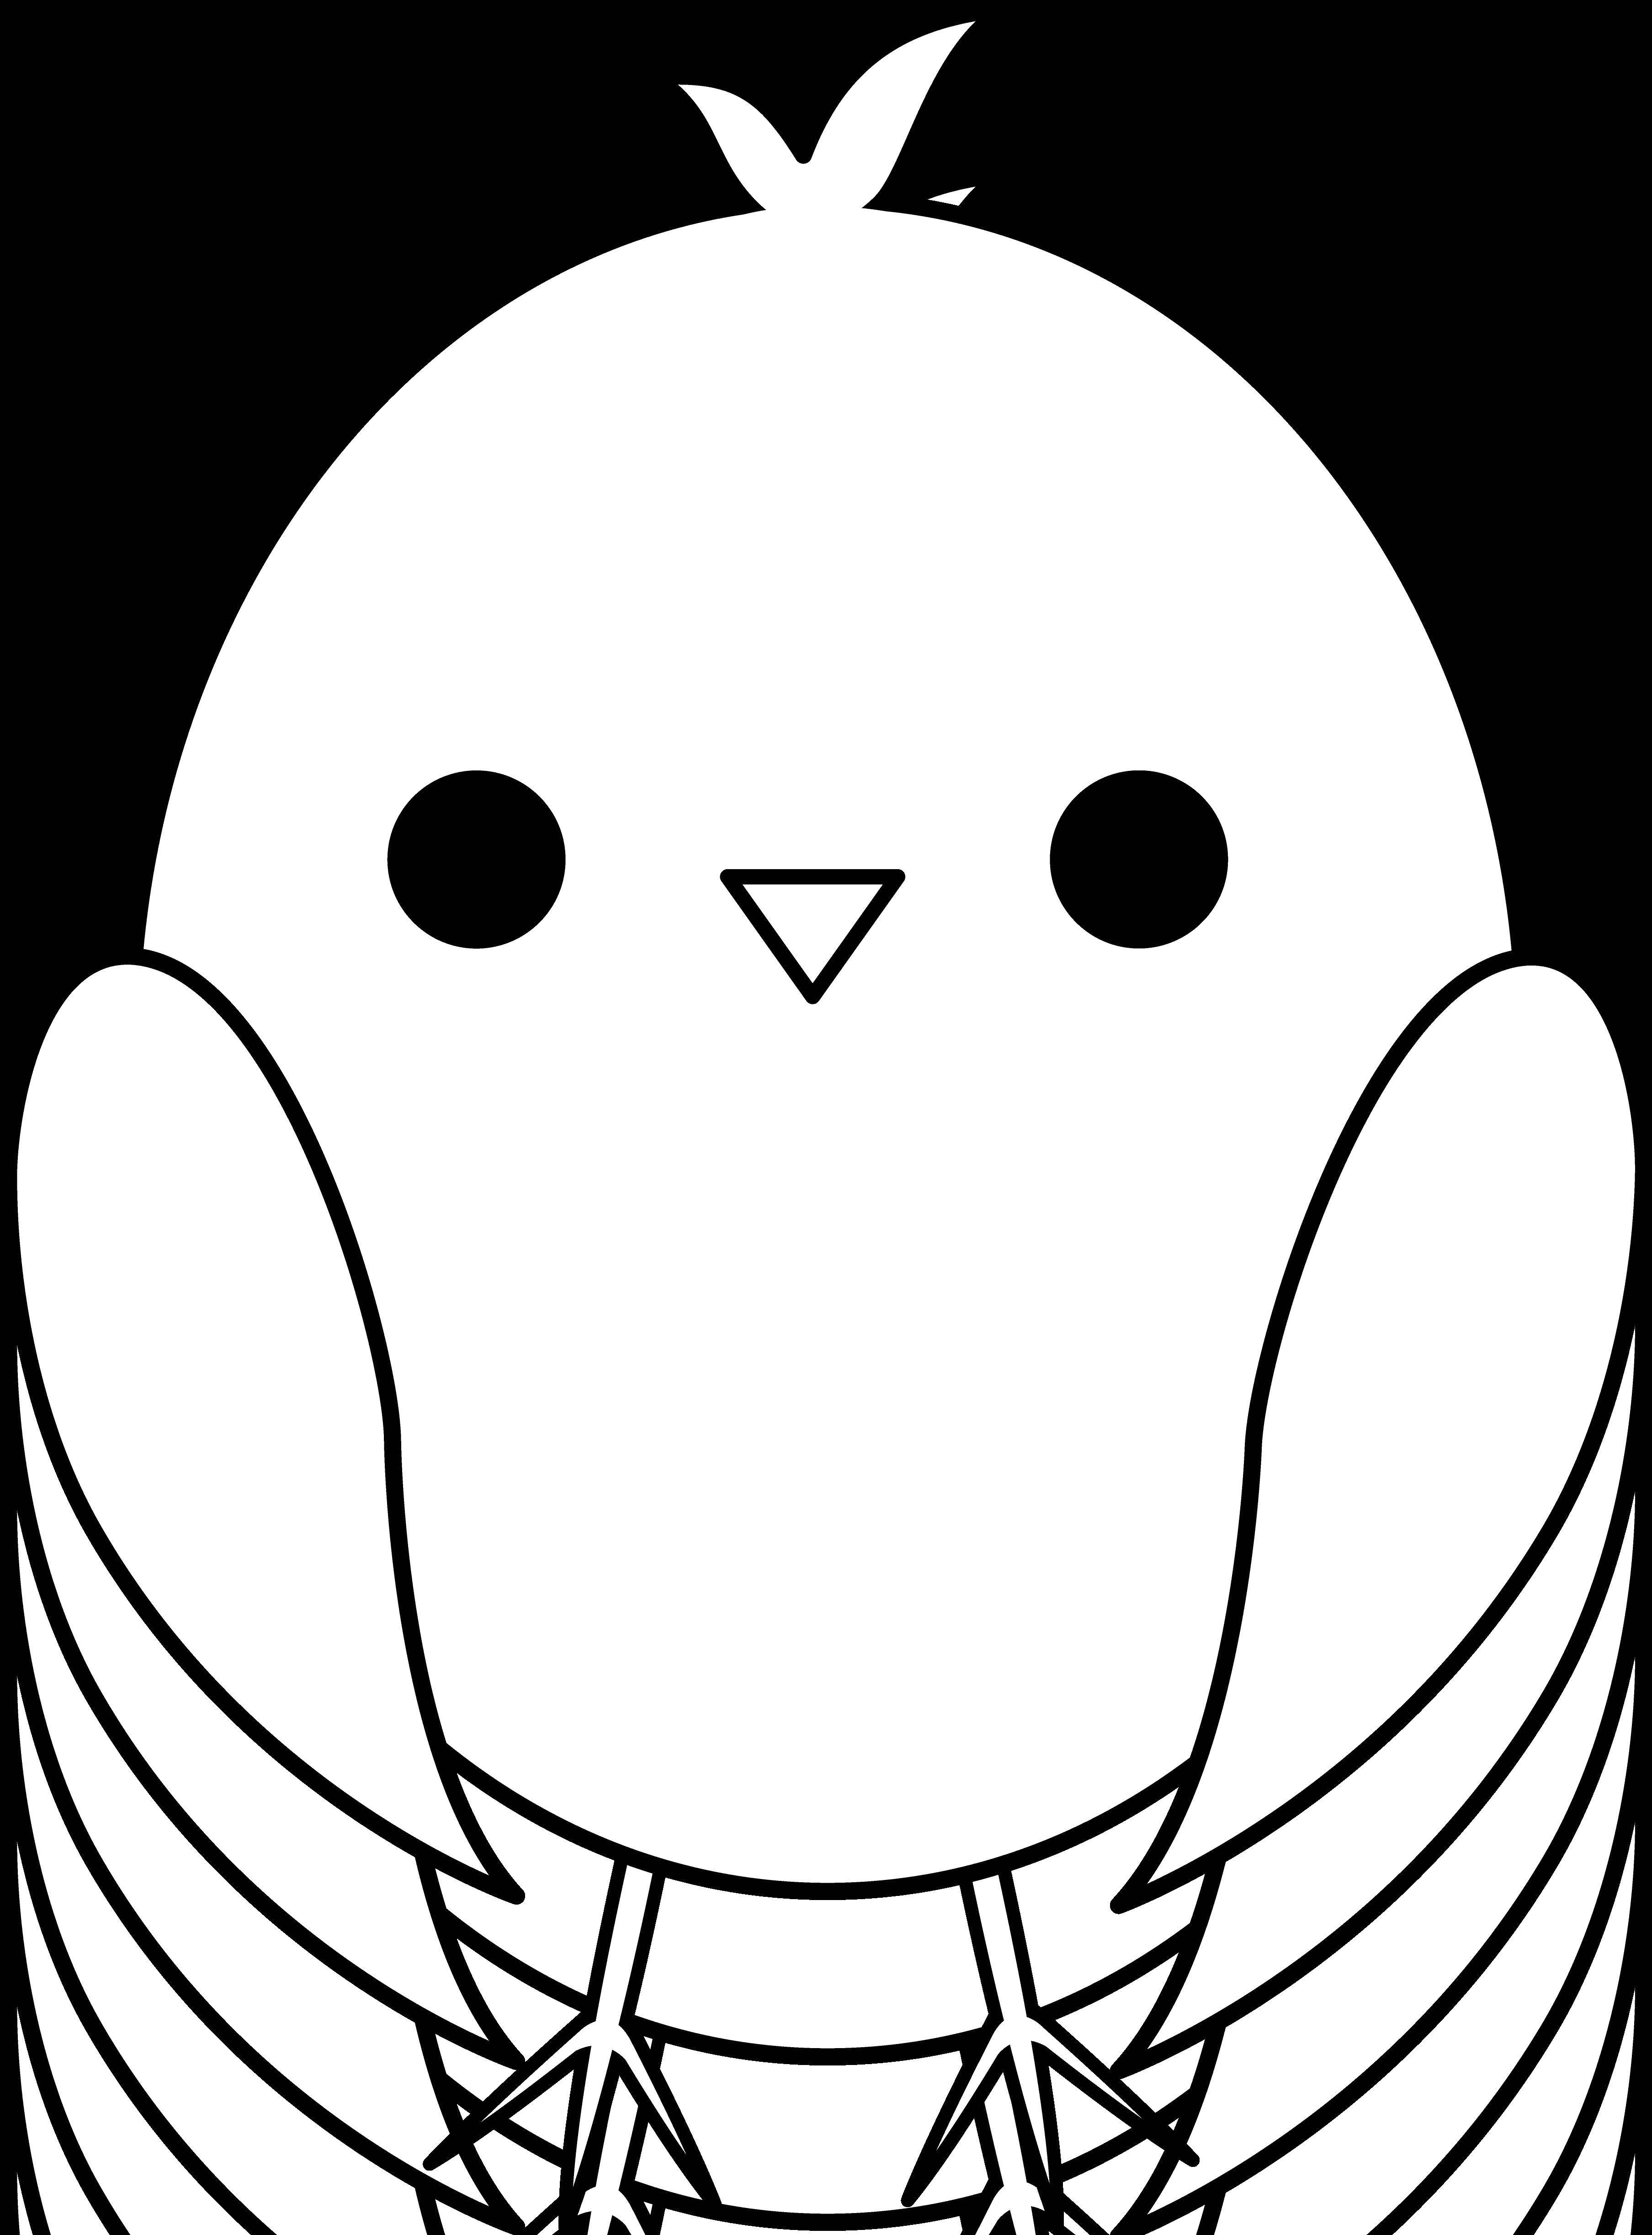 Coloring Pretty bird. Category The contours for cutting out the birds. Tags:  outline, bird, black background.